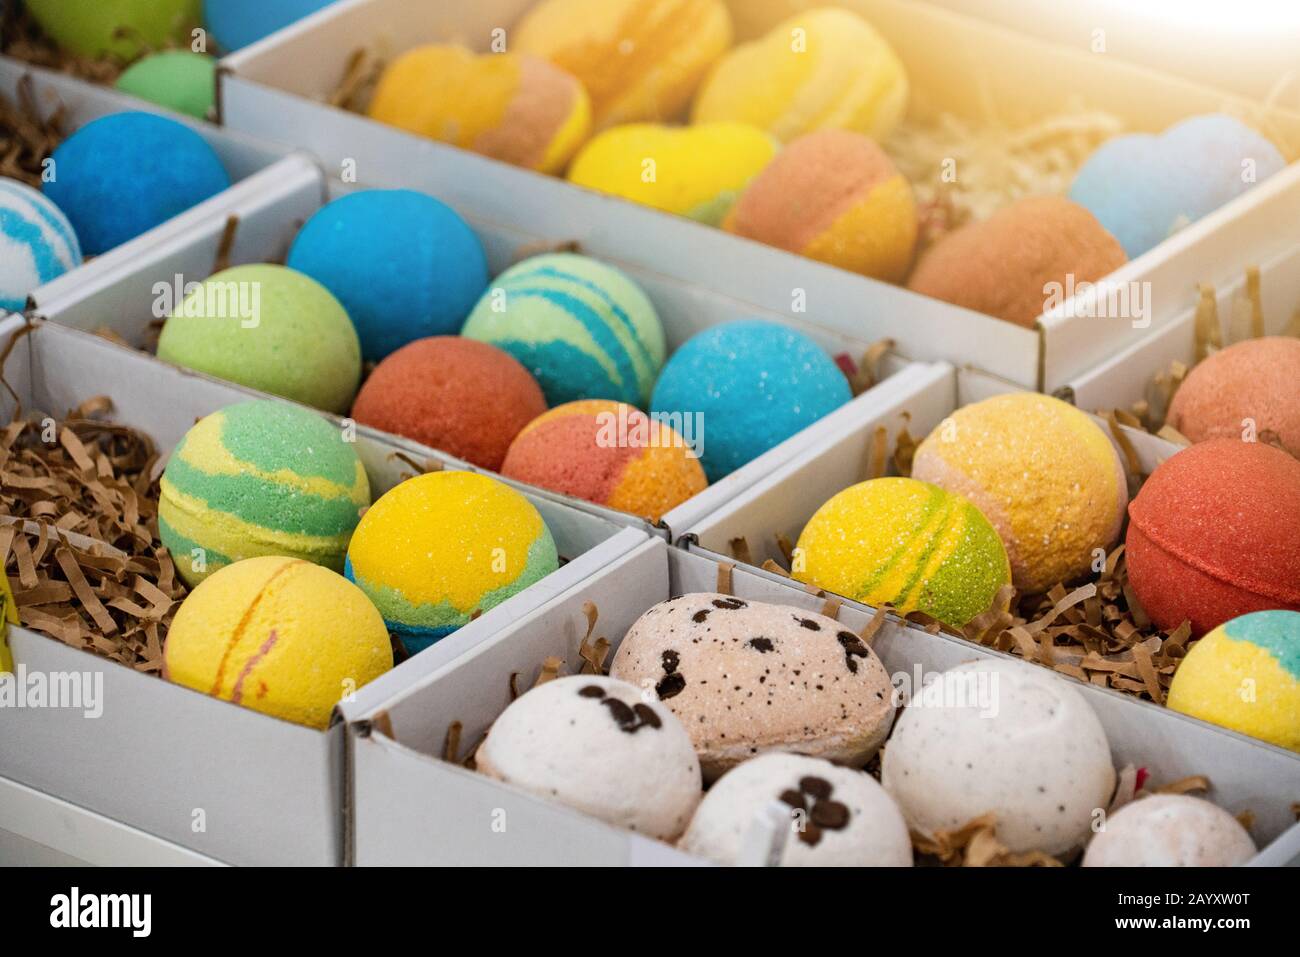 Box with handmade colorful aromatic Soap Stock Photo